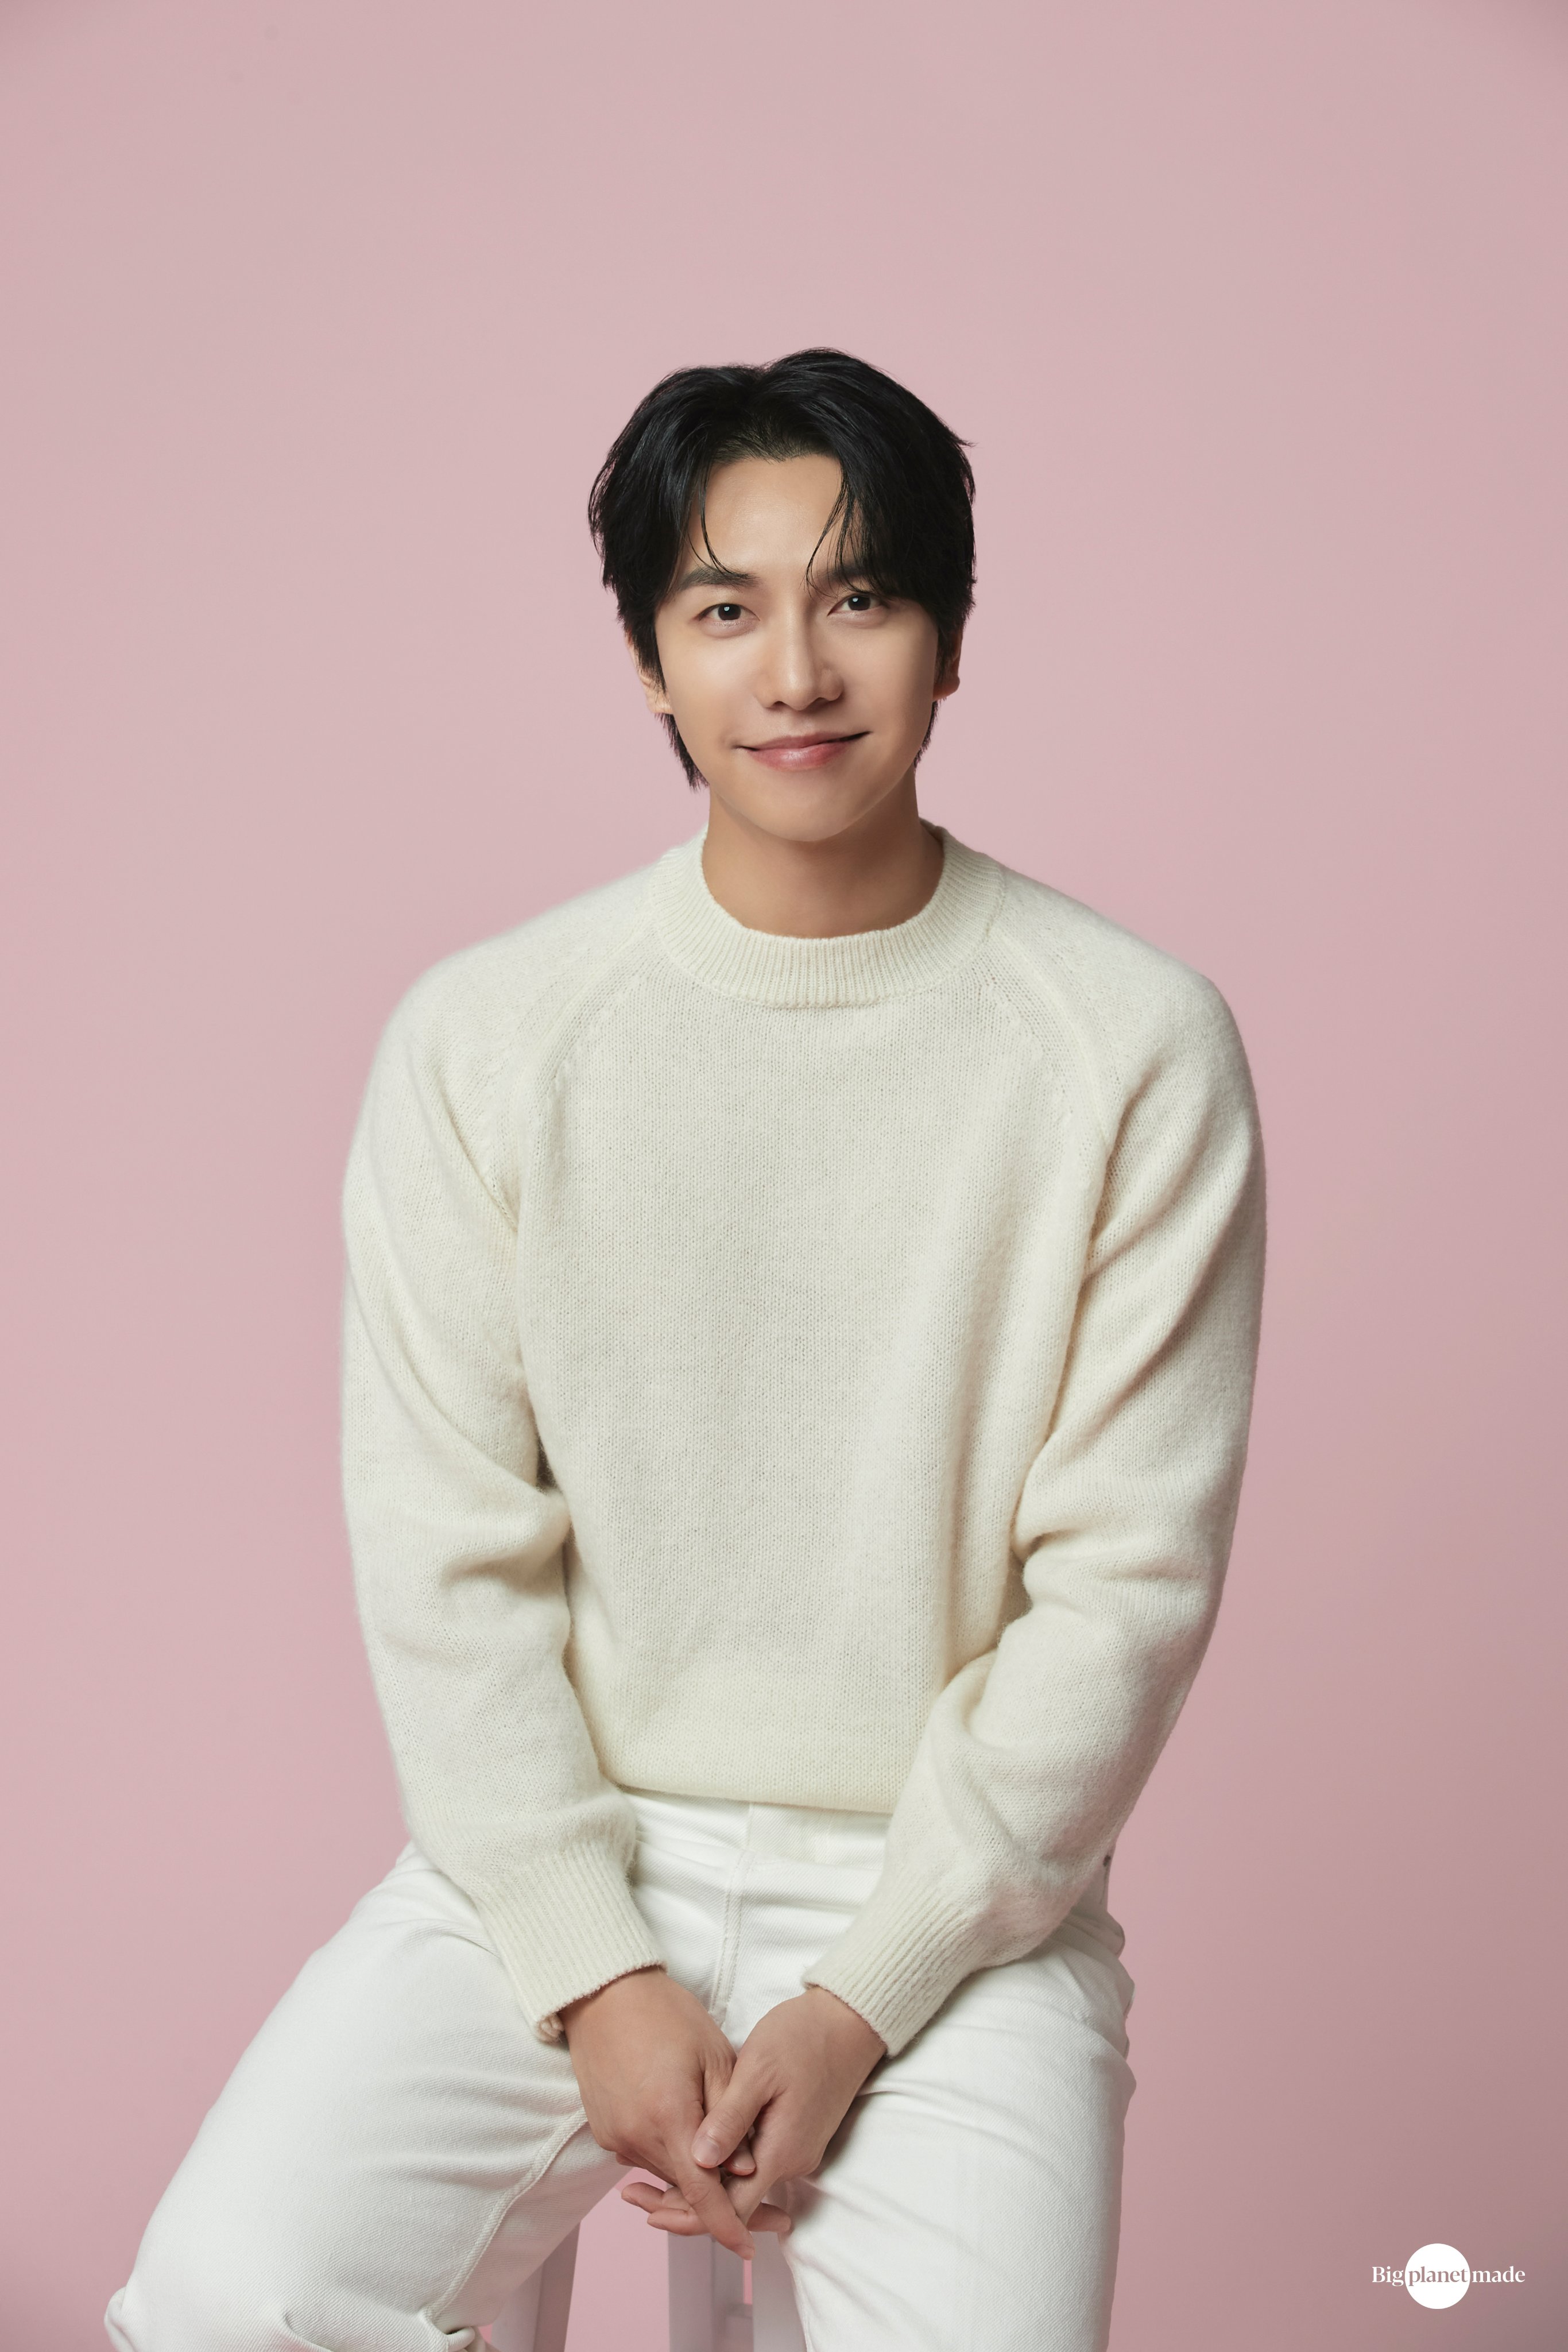 Lee Seung Gi Signs With Big Planet Made Entertainment + Drops New Profile Photos